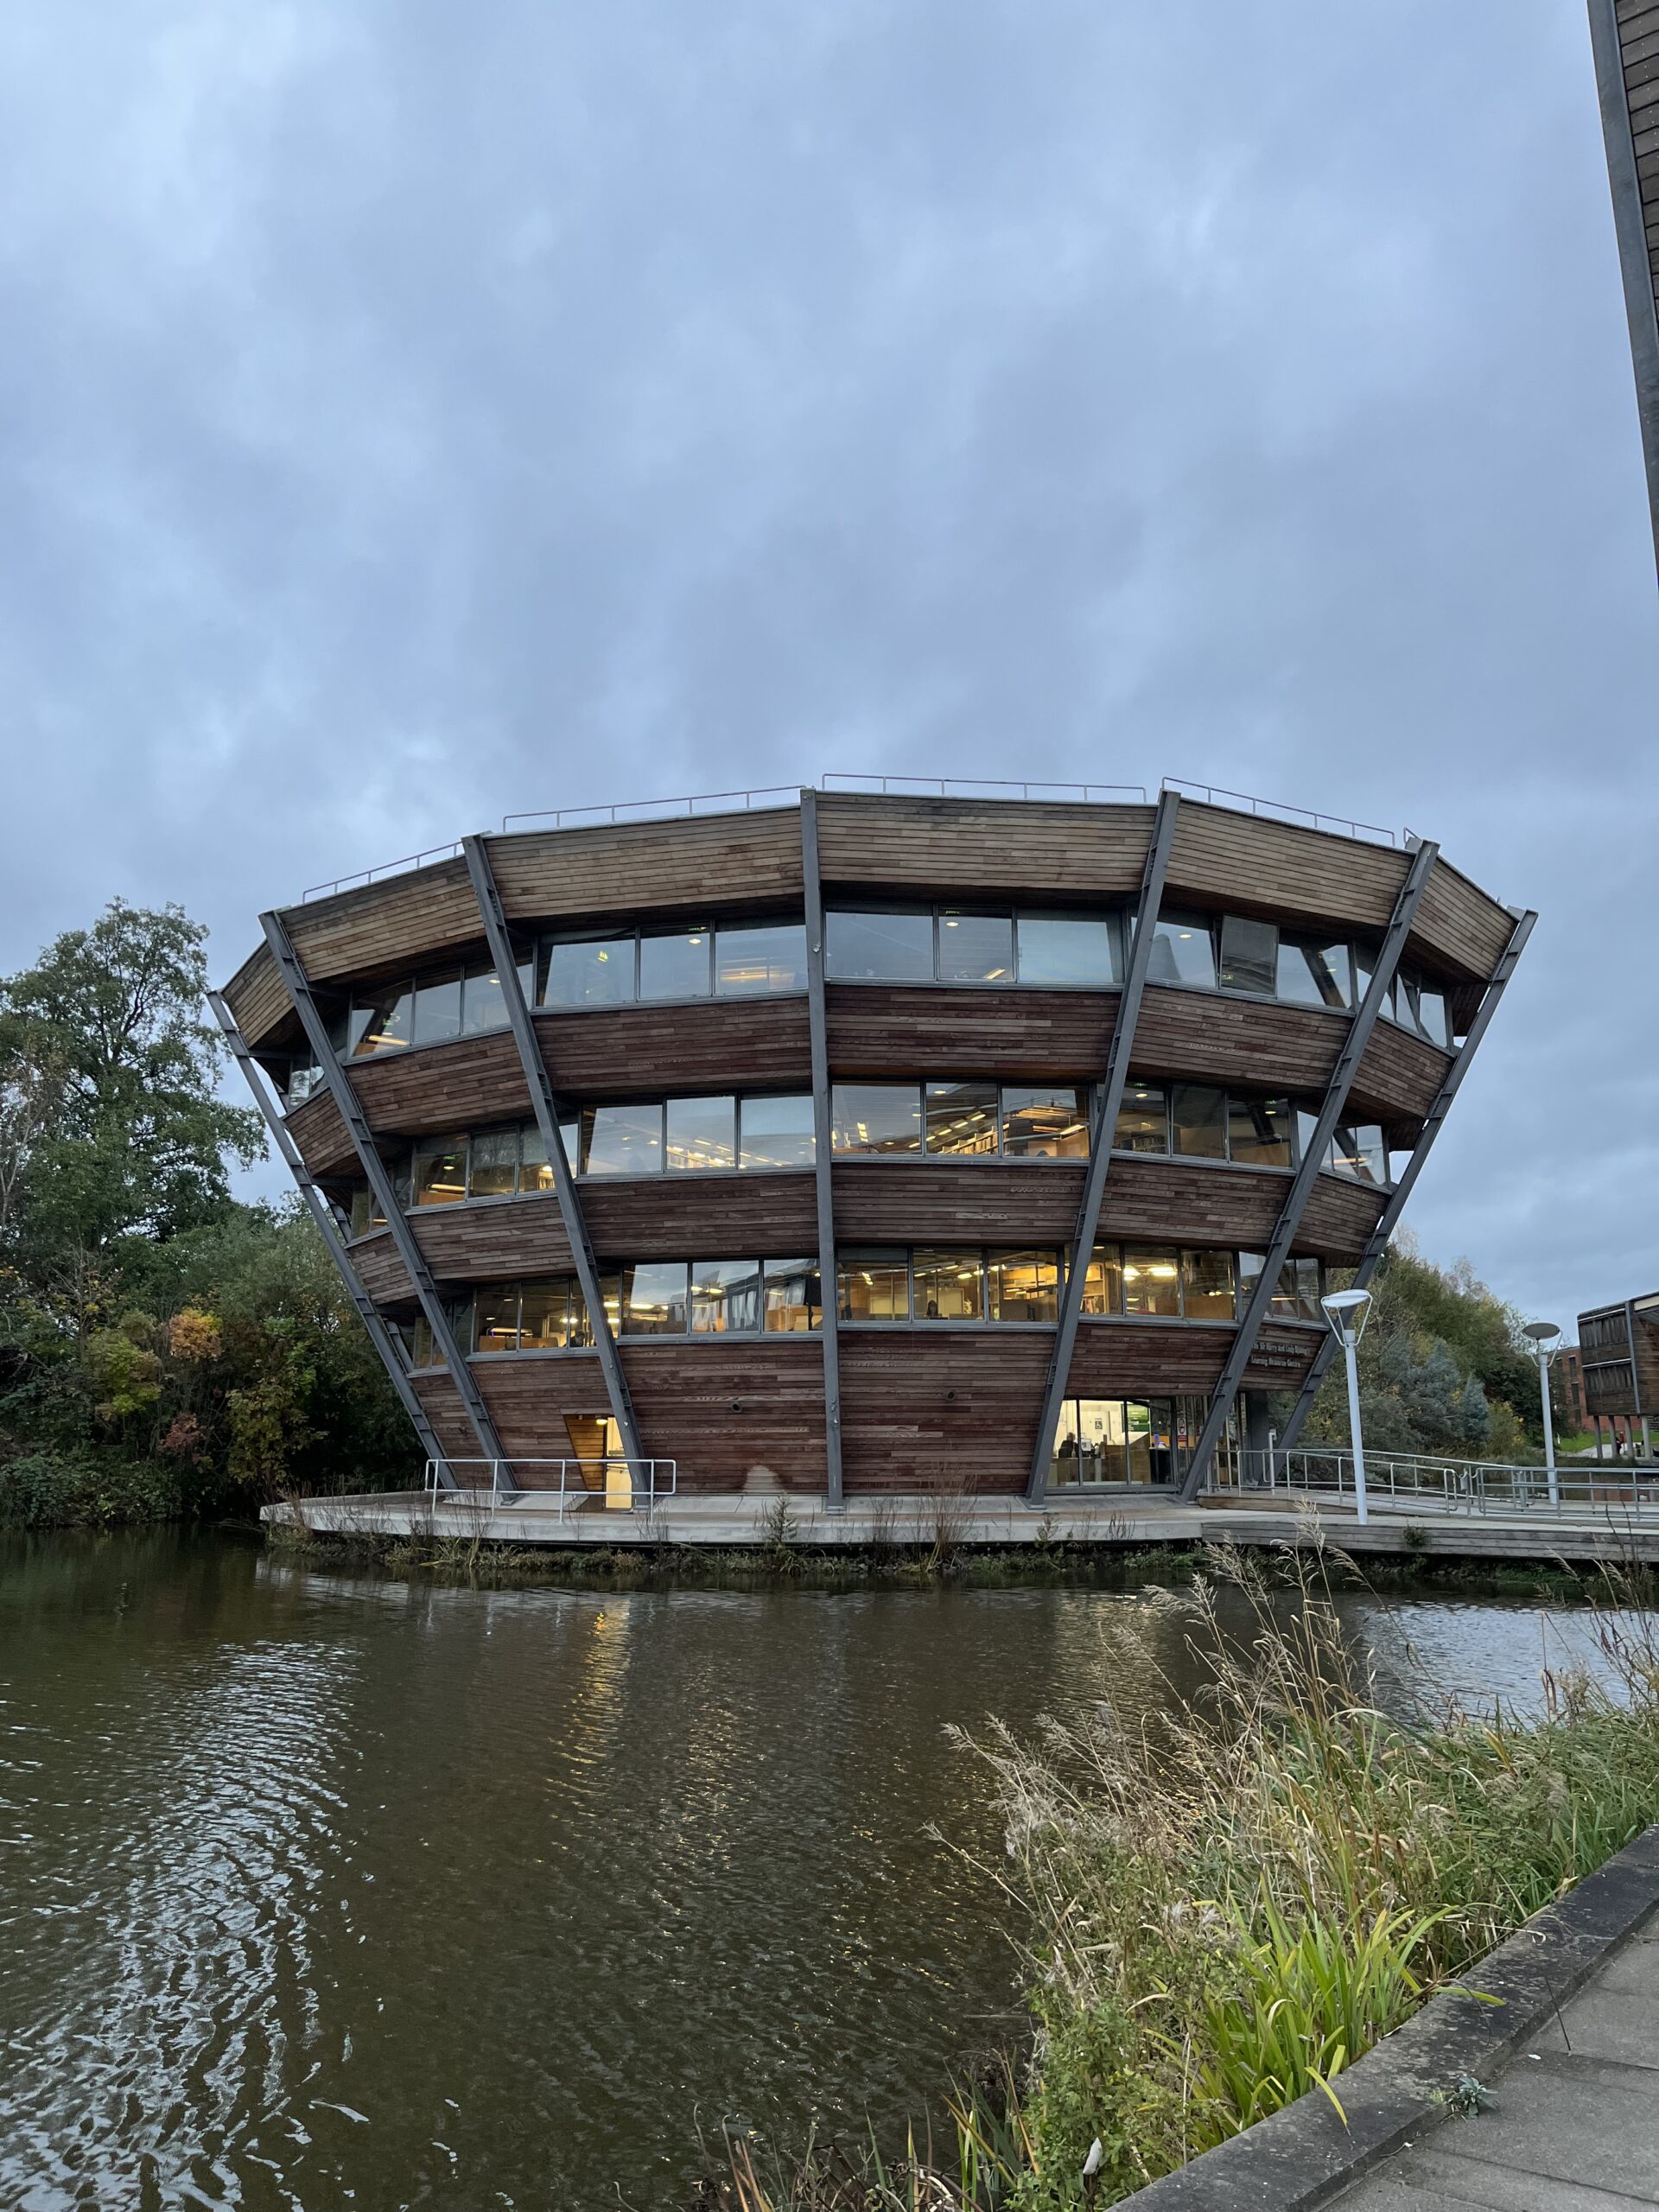 Displayed is a brown wood and lots of glass windowed bowl shape building with thin, steel, vertical beams. The building is surrounded by a small river of water with a concrete walk way to get to the building.